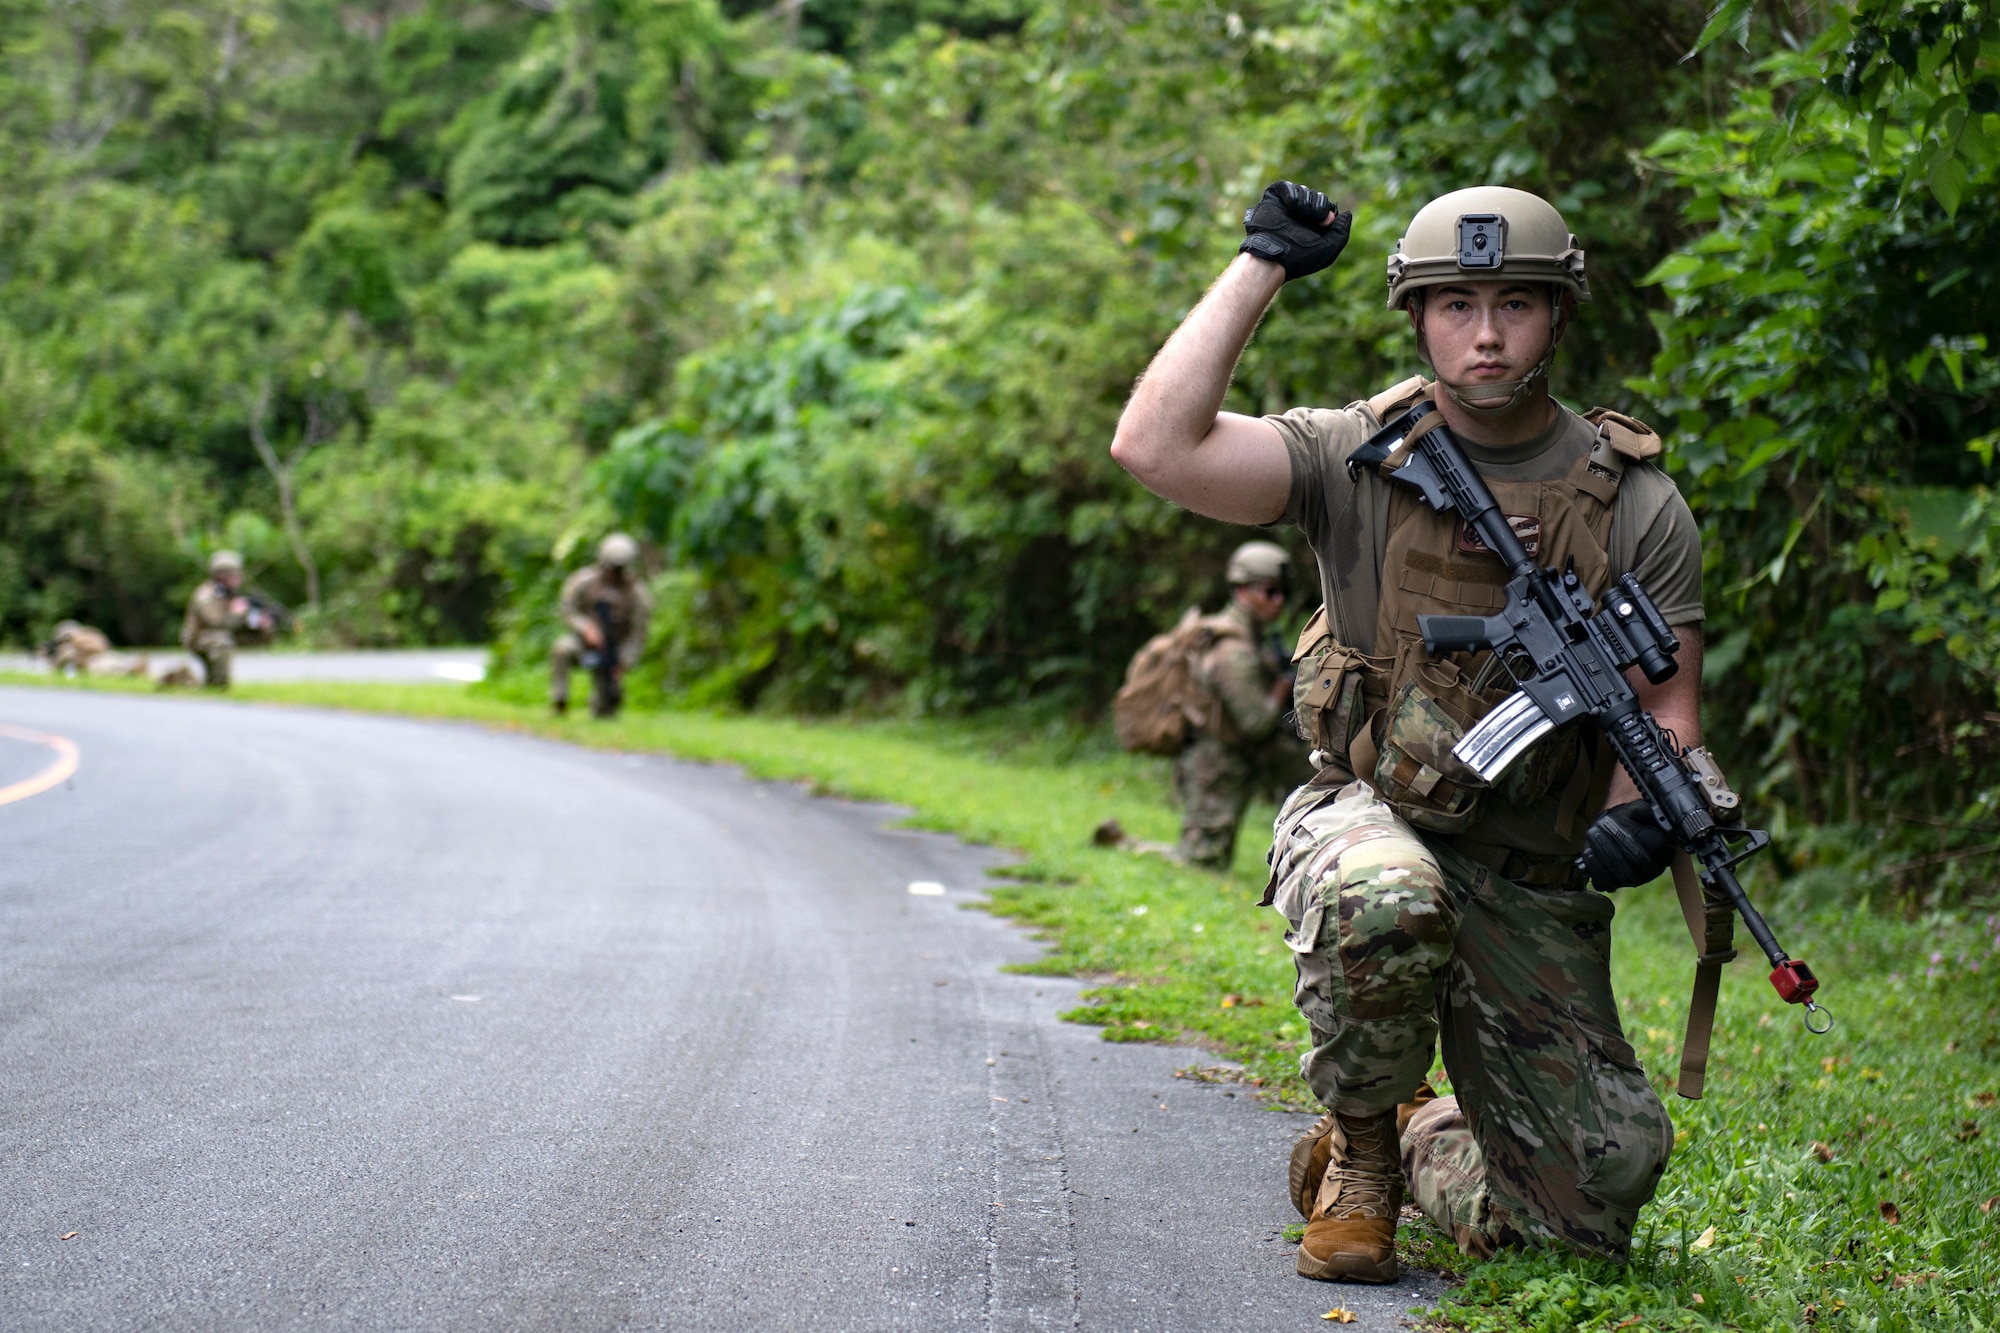 A U.S. Air Force Airman assigned to the 18th Security Forces Squadron gives his group the signal to halt during a field training exercise at Kadena Air Base, Japan, April 27, 2022. Visual signals are a means of communication that can be used to transmit prearranged messages over short distances when maintaining silence or stealth is necessary. (U.S. Air Force photo by Senior Airman Jessi Monte)